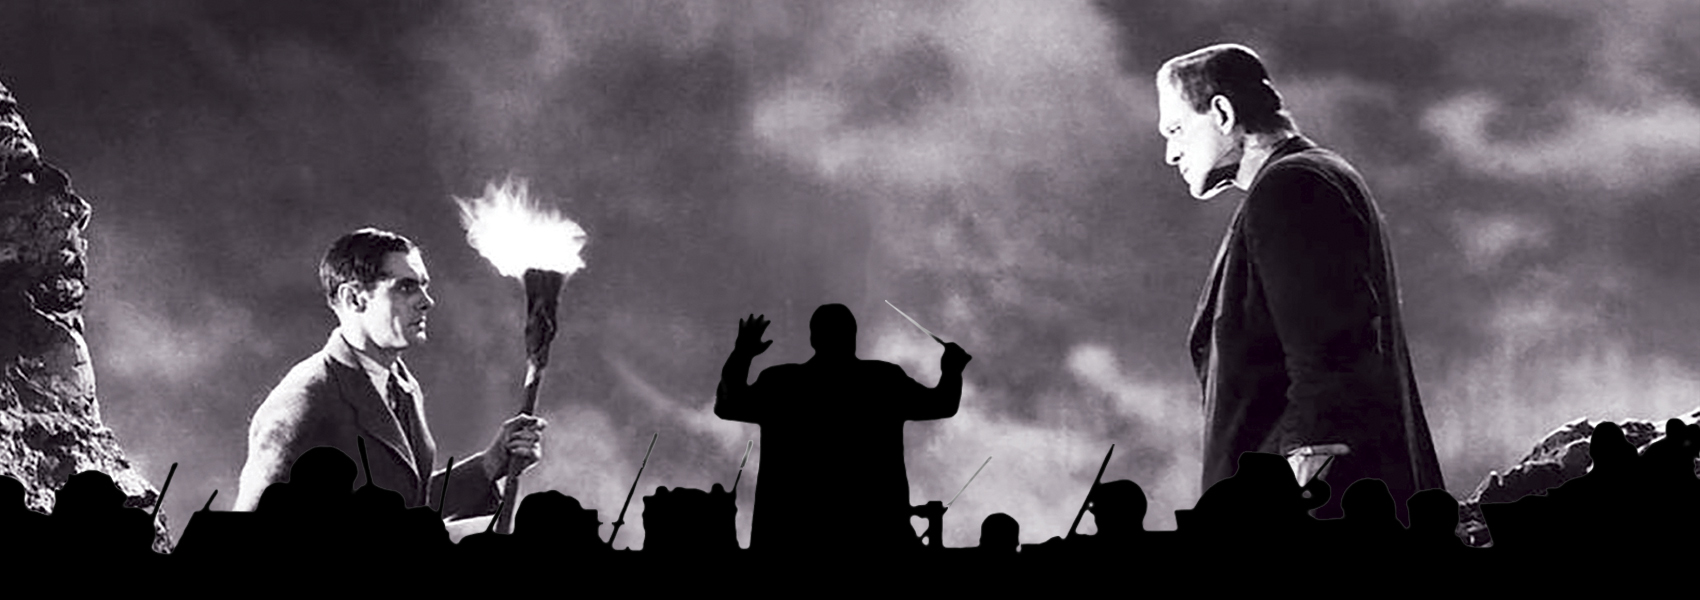 An orchestra is pictured in silhouette in front of a scene from the movie Frankenstein.